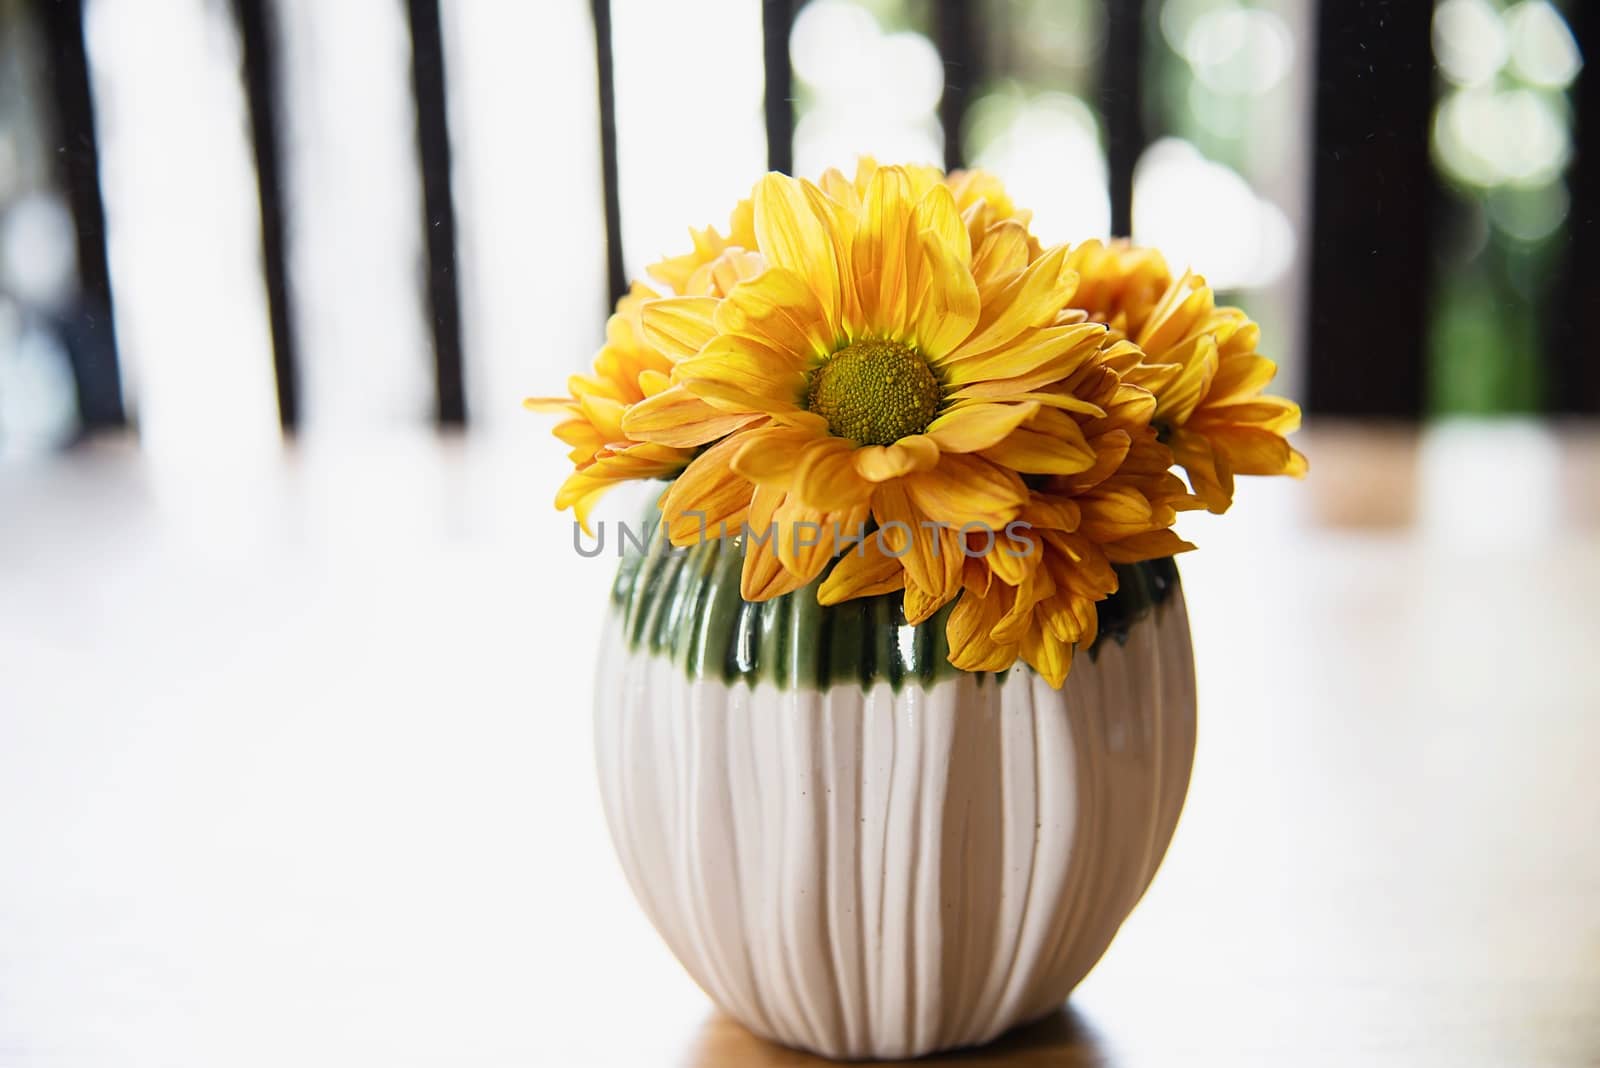 Fresh colorful small sun flower in ceramic pot - yellow flower decoration for background use by pairhandmade